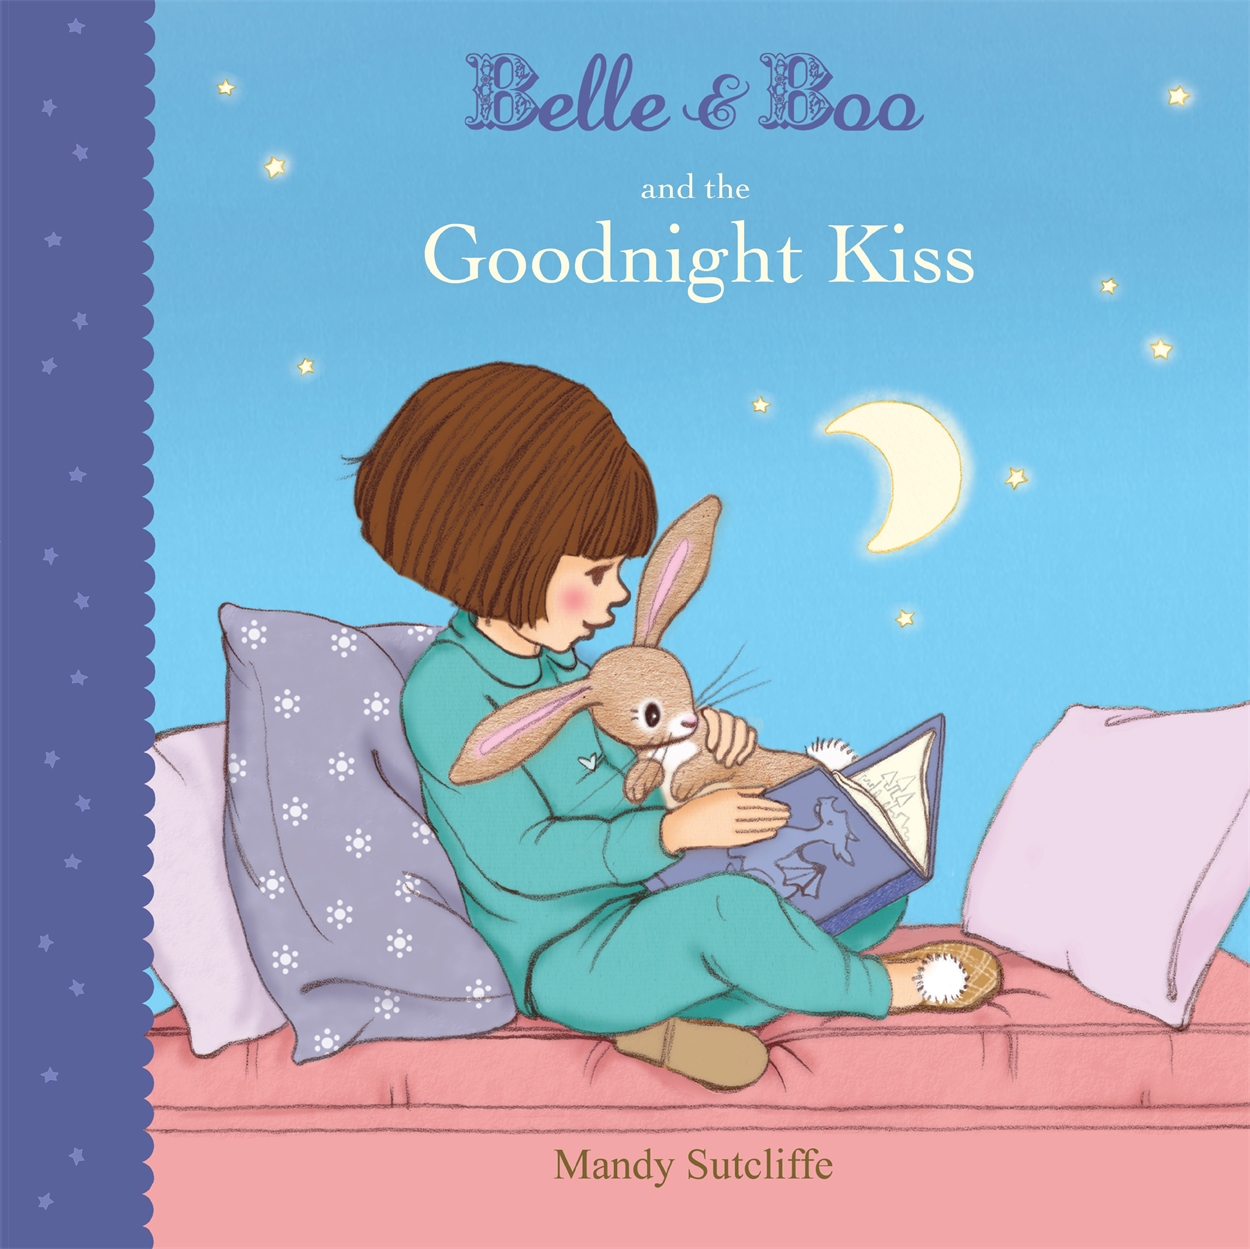 Belle & Boo and the Goodnight Kiss by Mandy Sutcliffe | Hachette ...